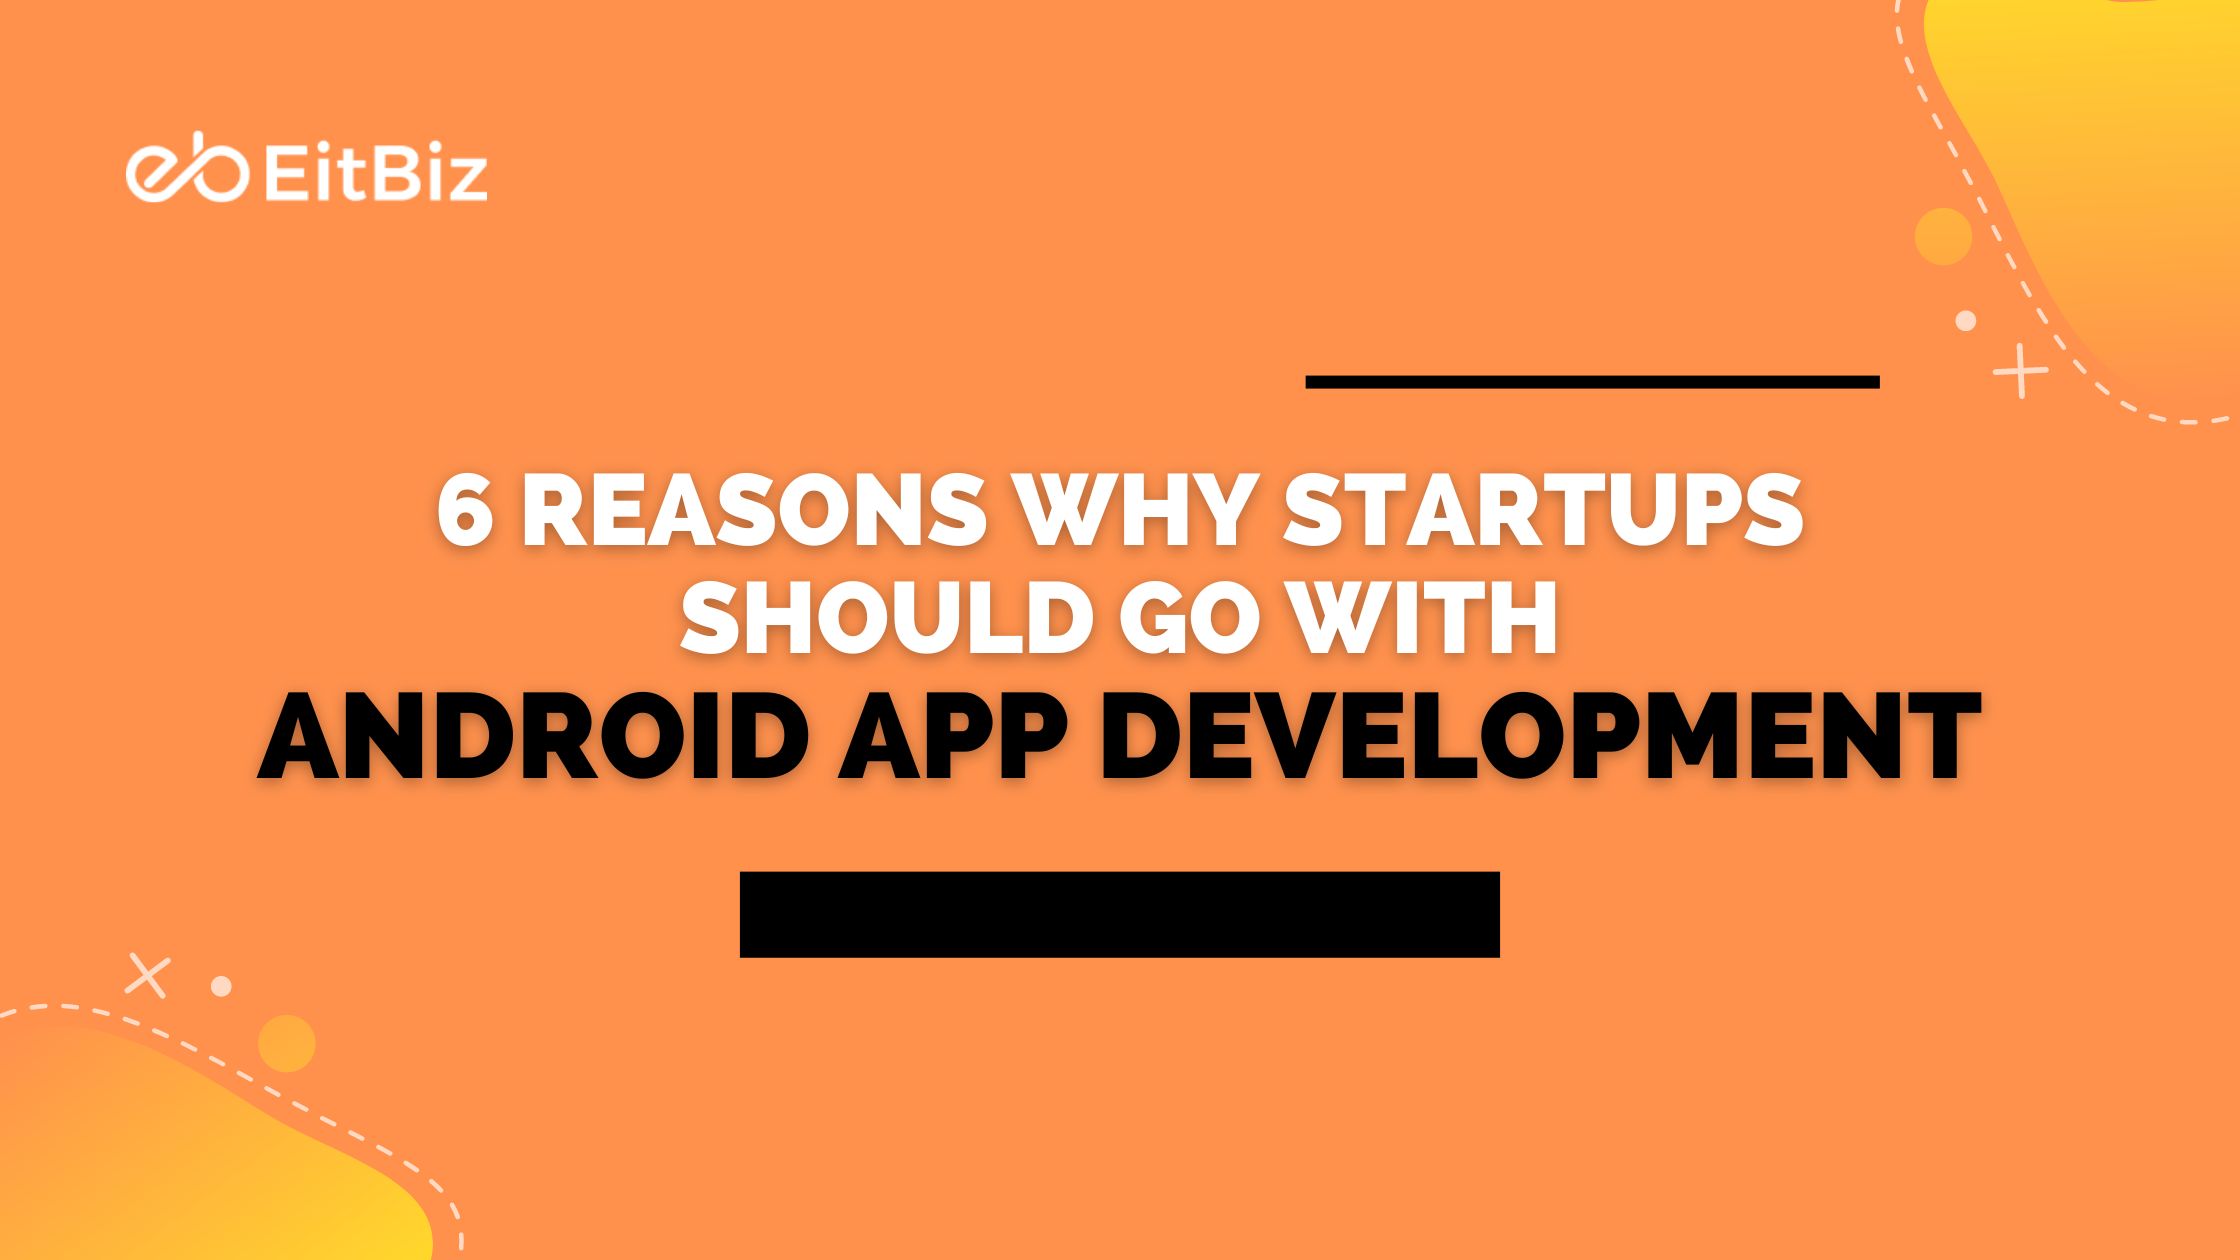 6 Reasons Why Startups Should Go with Android App Development